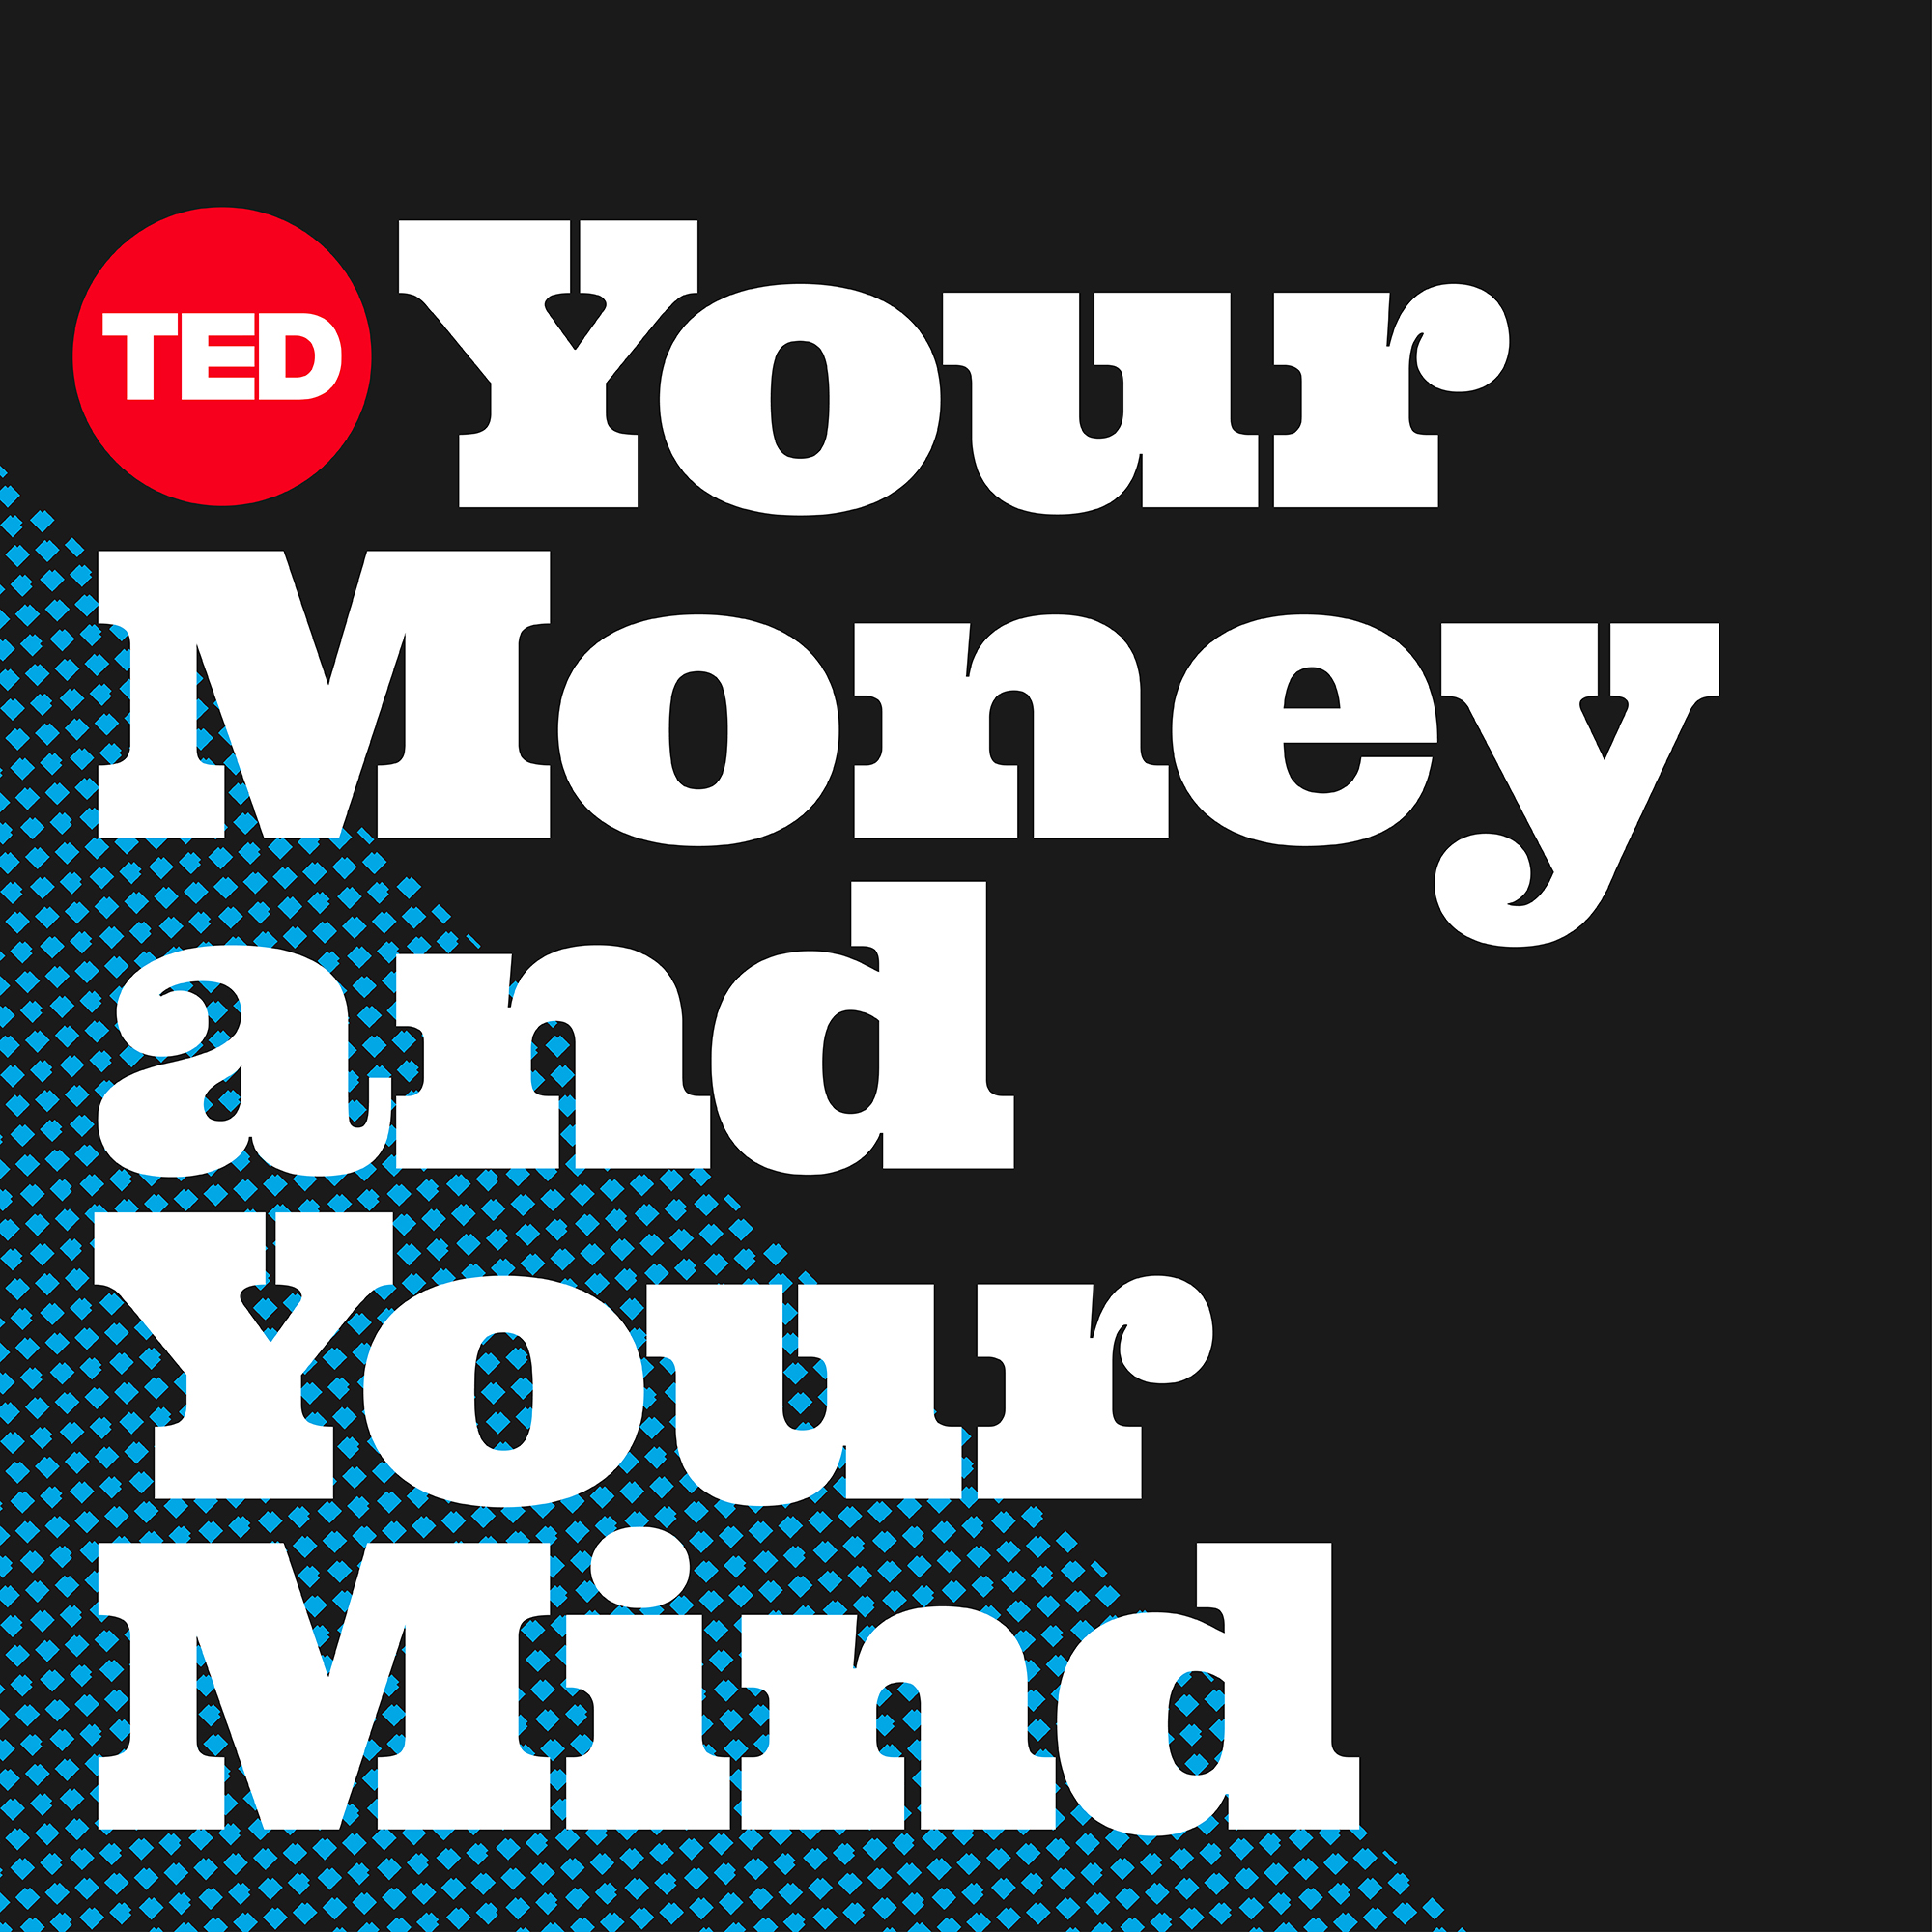 Your Money and Your Mind with Wendy De La Rosa